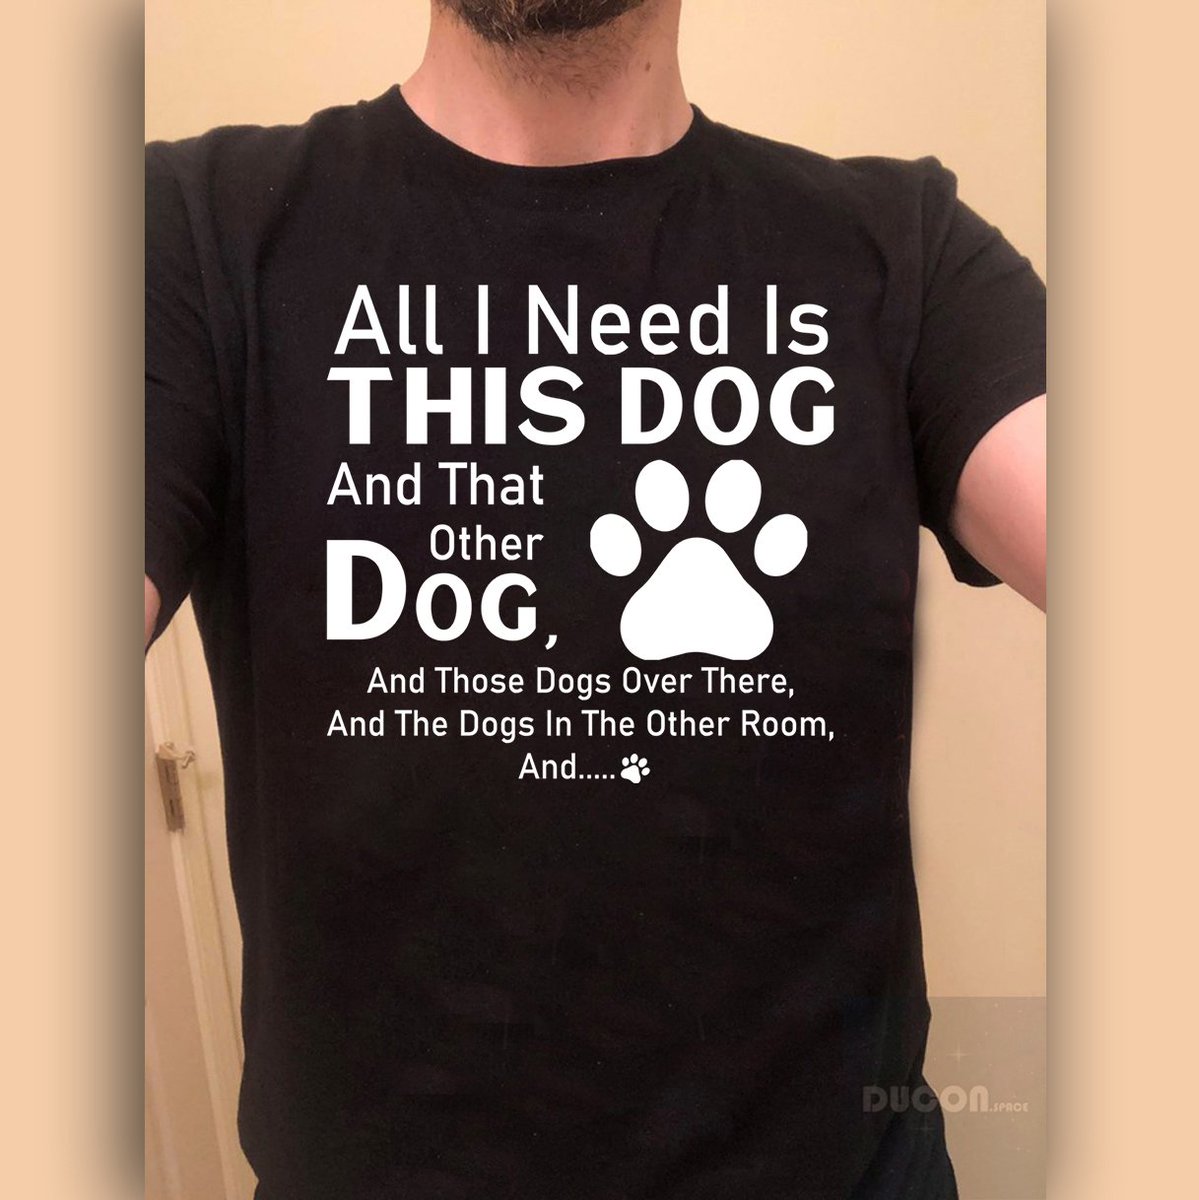 All I need is this dog and that other dog and those dogs shirt Order here: ducon.space/all-i-need-is-…